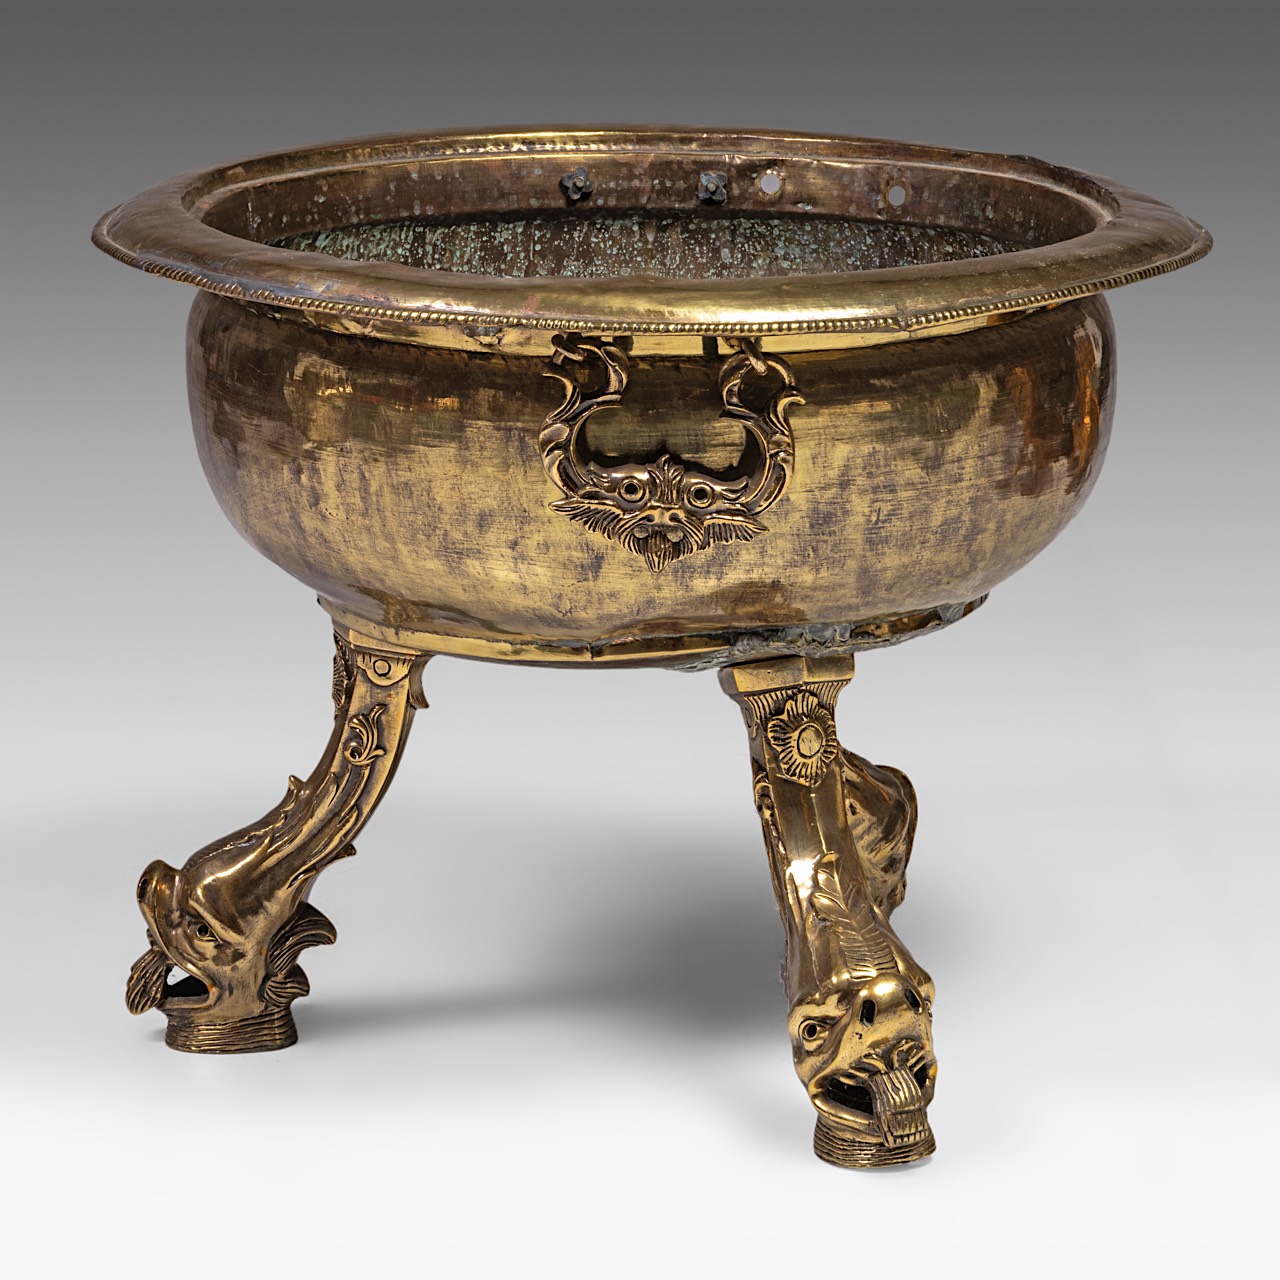 A brass wine cooler, the feet moddeled as dolphins, ca. 1700, H 47 - dia 60 cm - Image 2 of 6